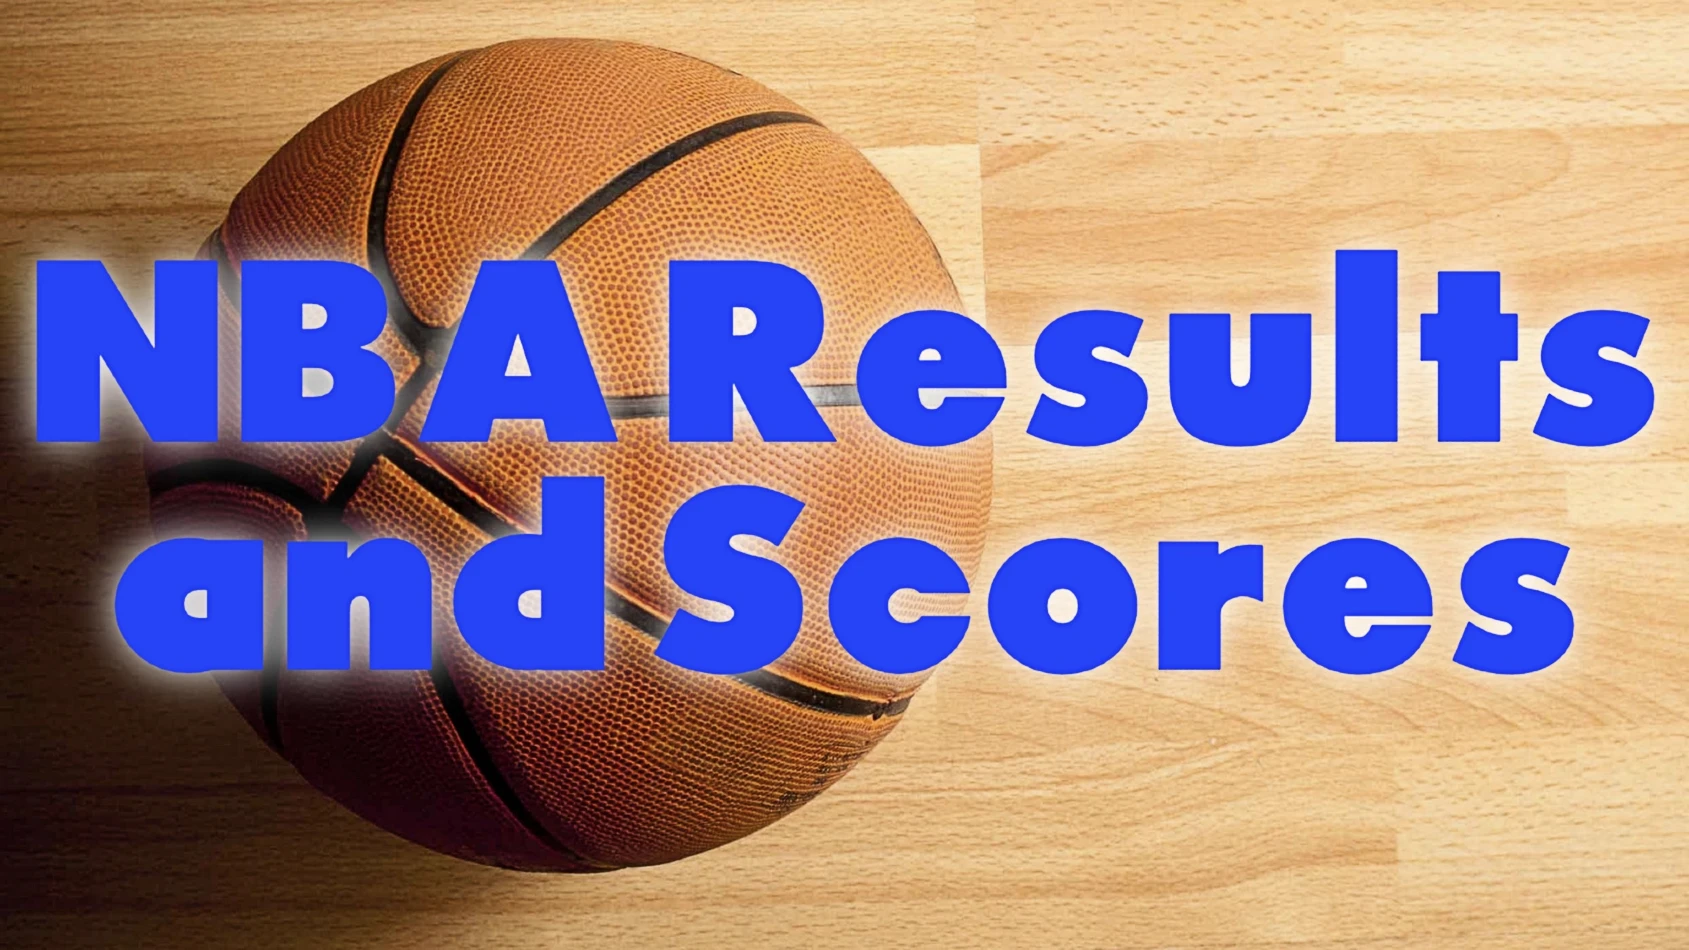 Check out the Latest NBA results and scores today